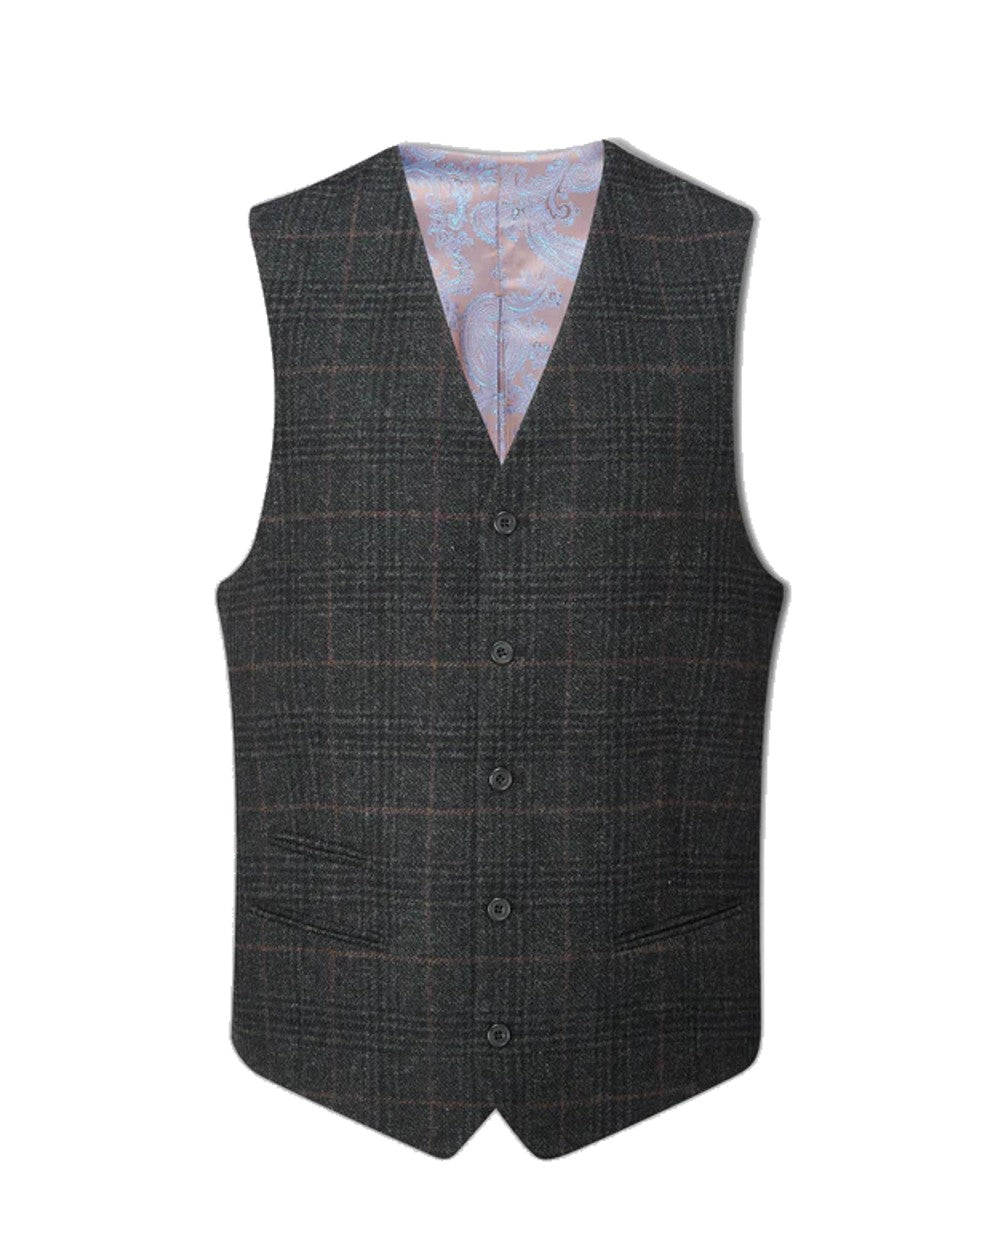 Alan Paine Surrey Mens Tweed Lined Waistcoat in Green Check 